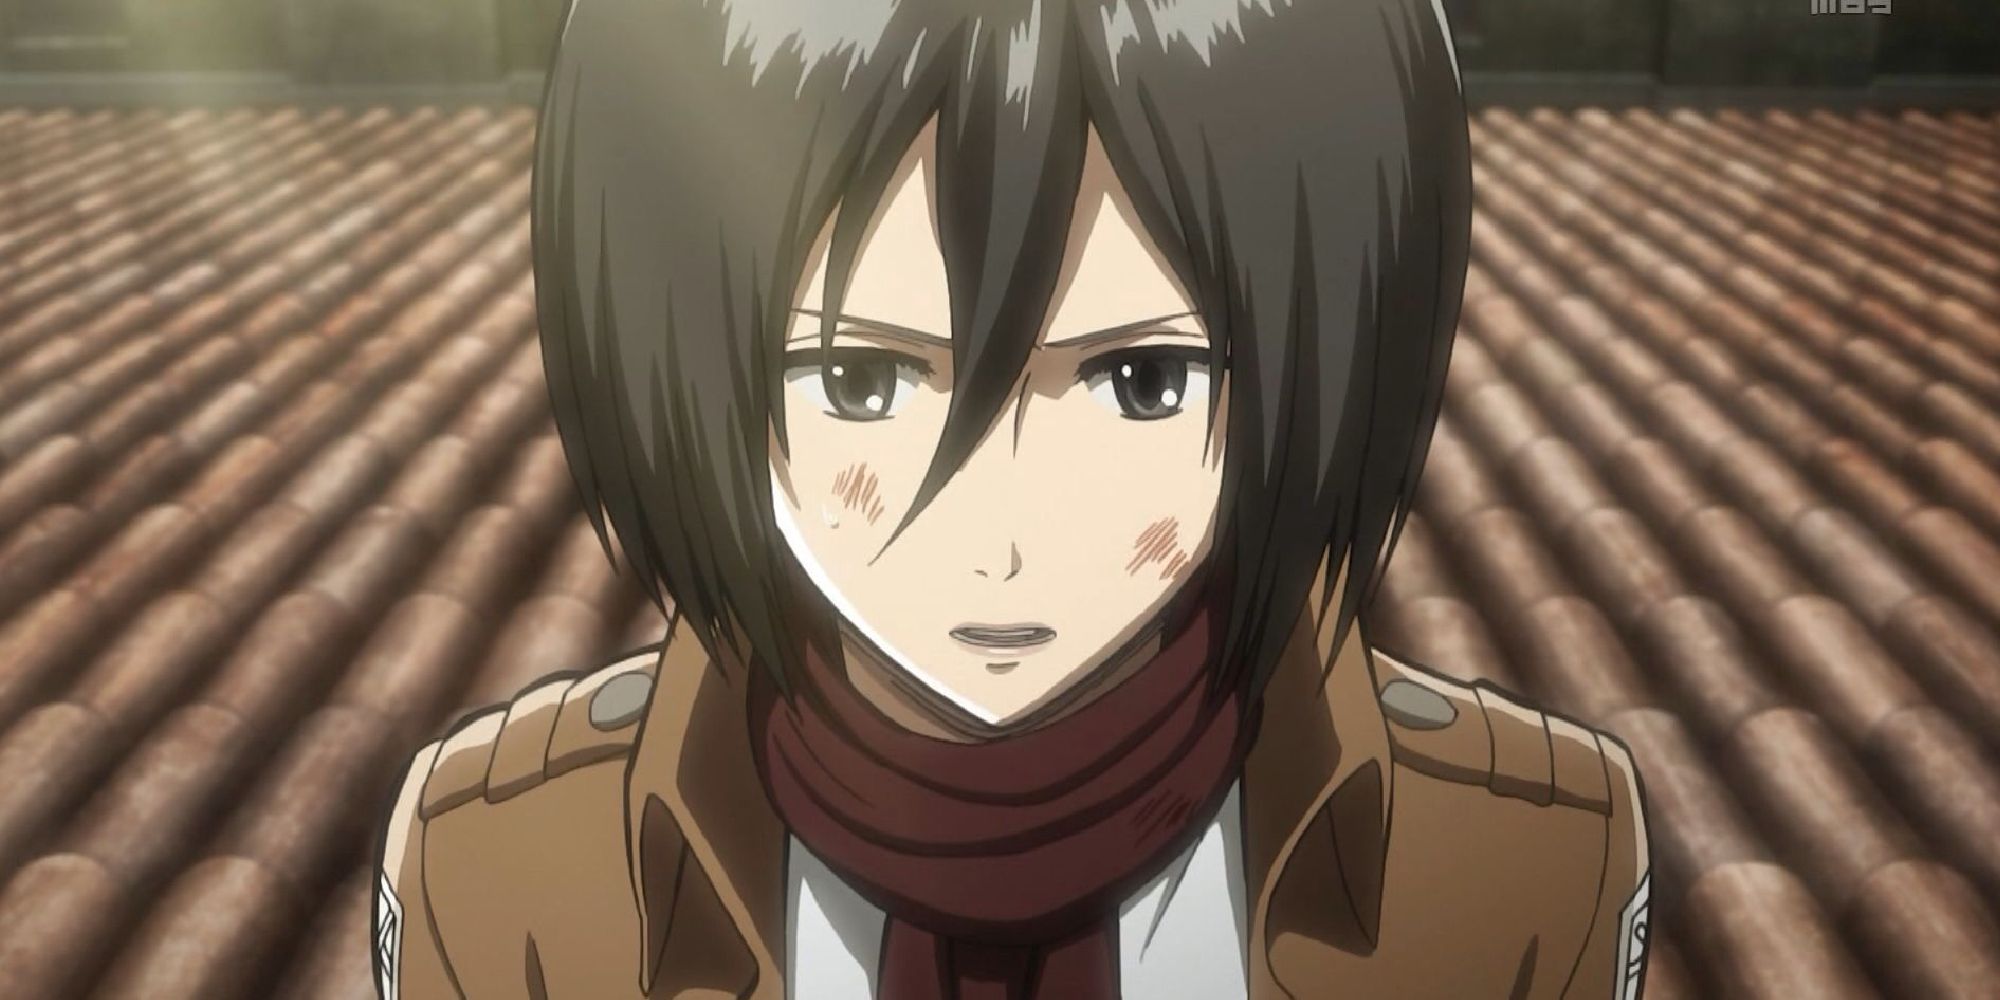 Short-haired Mikasa standing on a rooftop with her red scarf and Survey Corps uniform